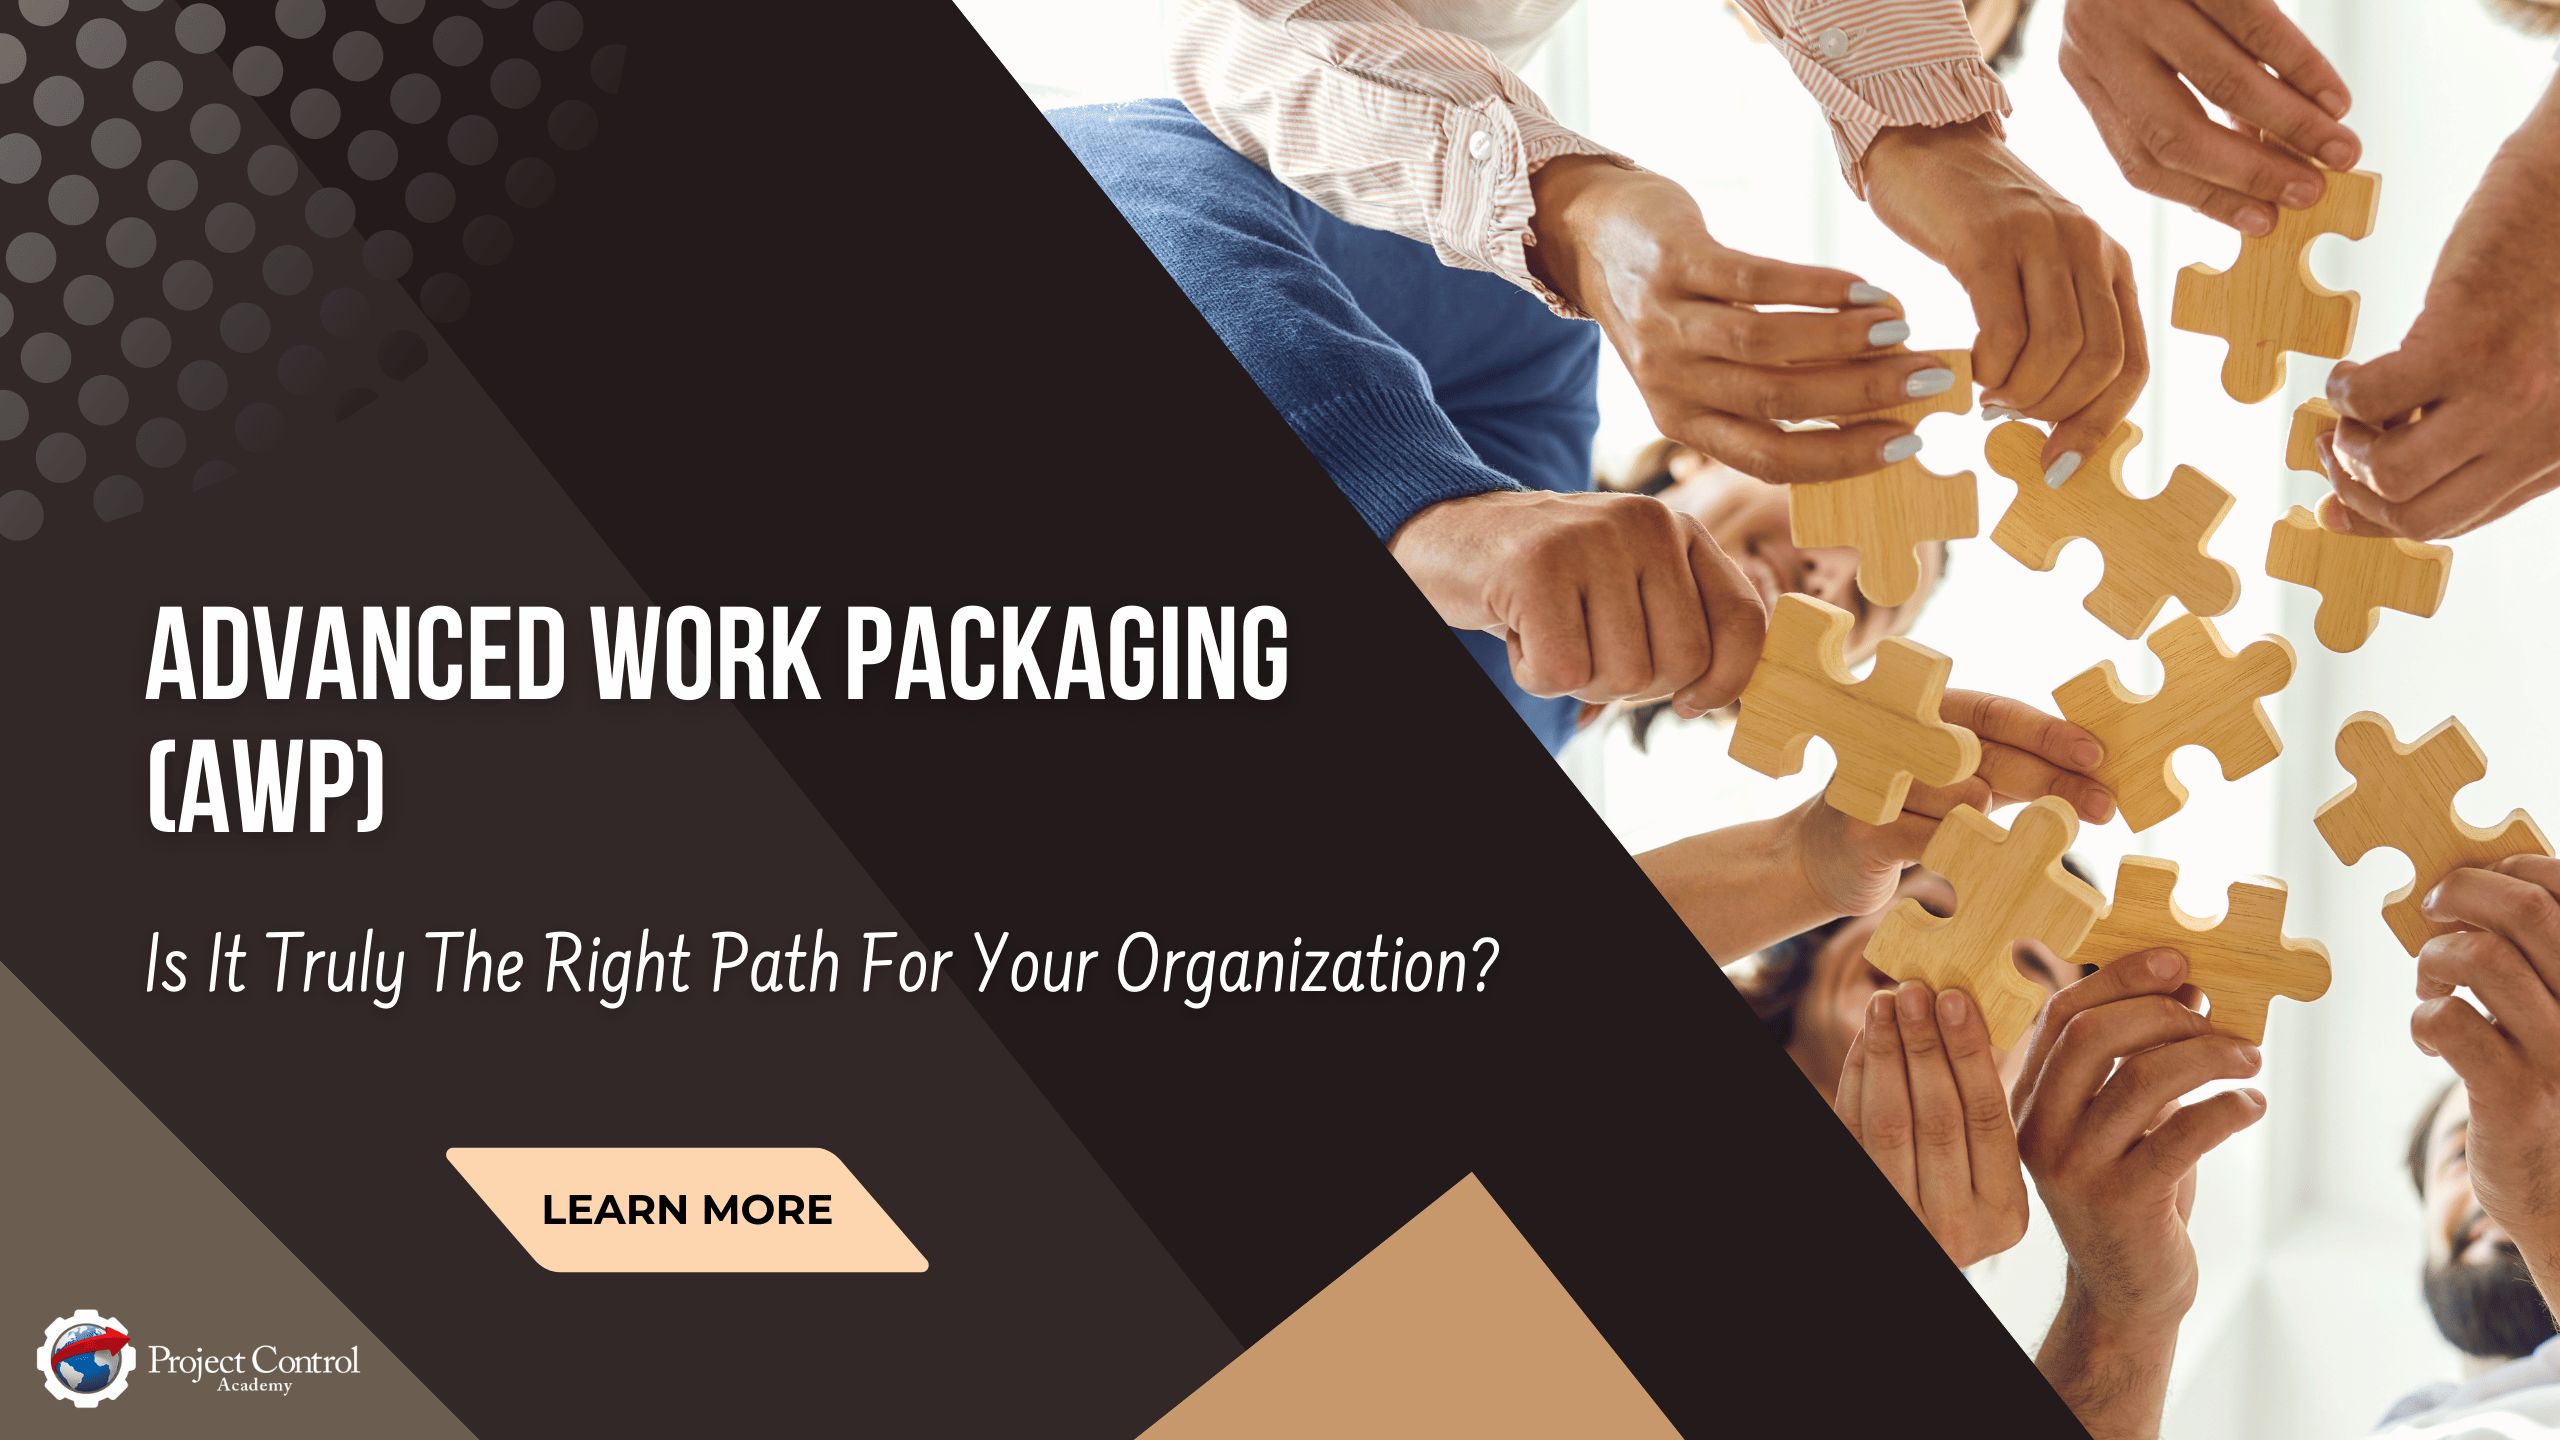 Is Advanced Work Packaging (AWP) Truly The Right Path For Your Organization